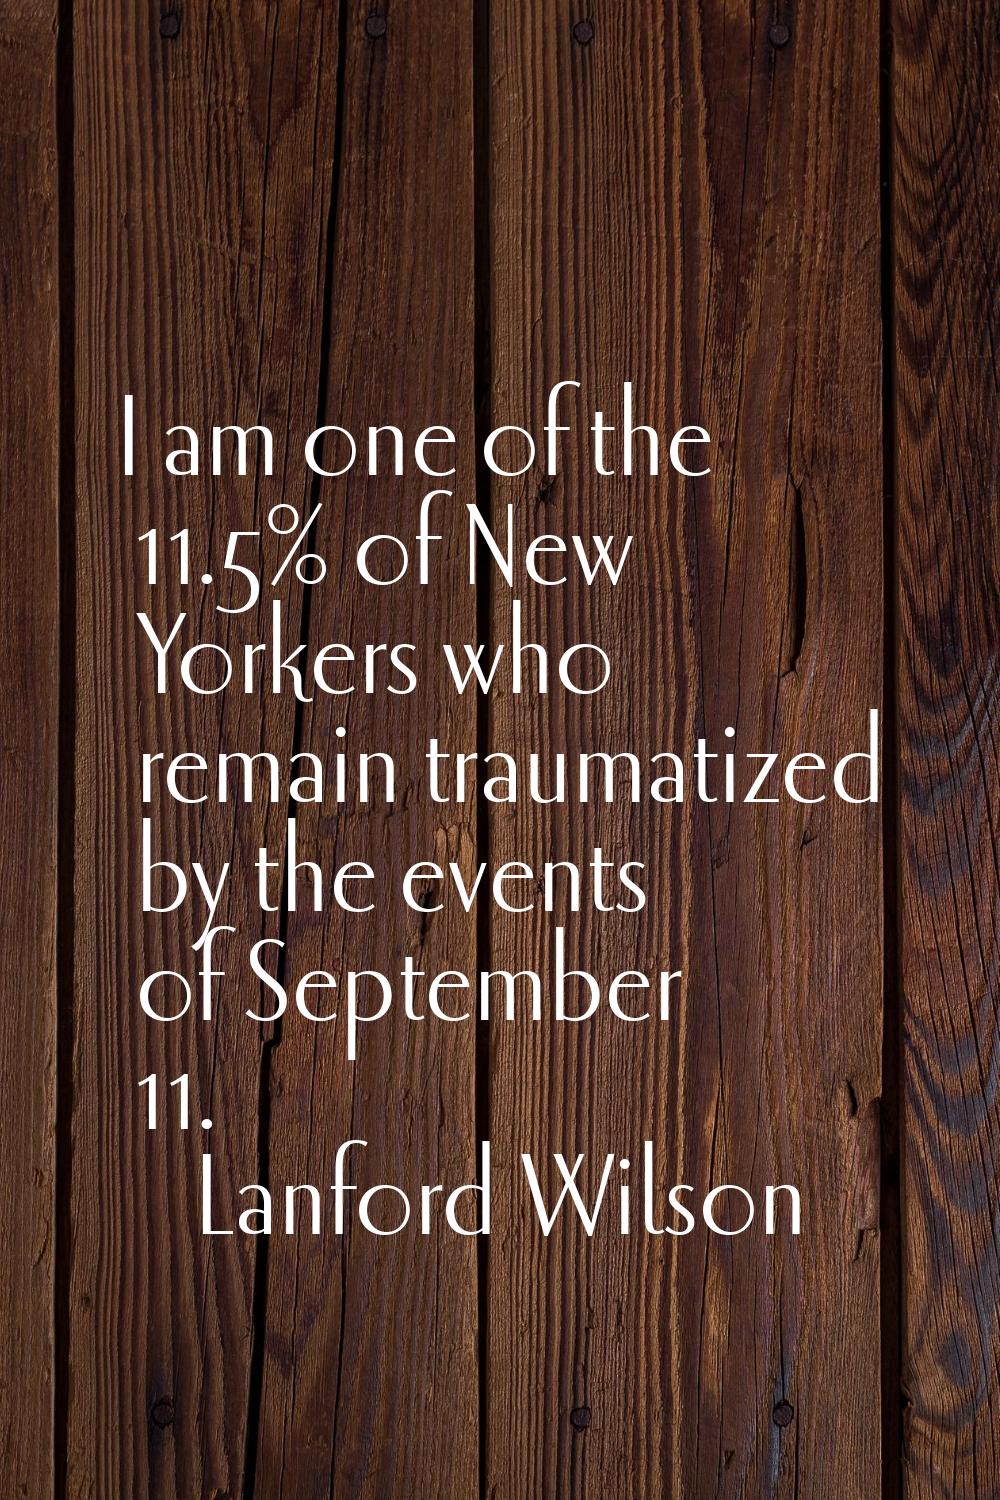 I am one of the 11.5% of New Yorkers who remain traumatized by the events of September 11.